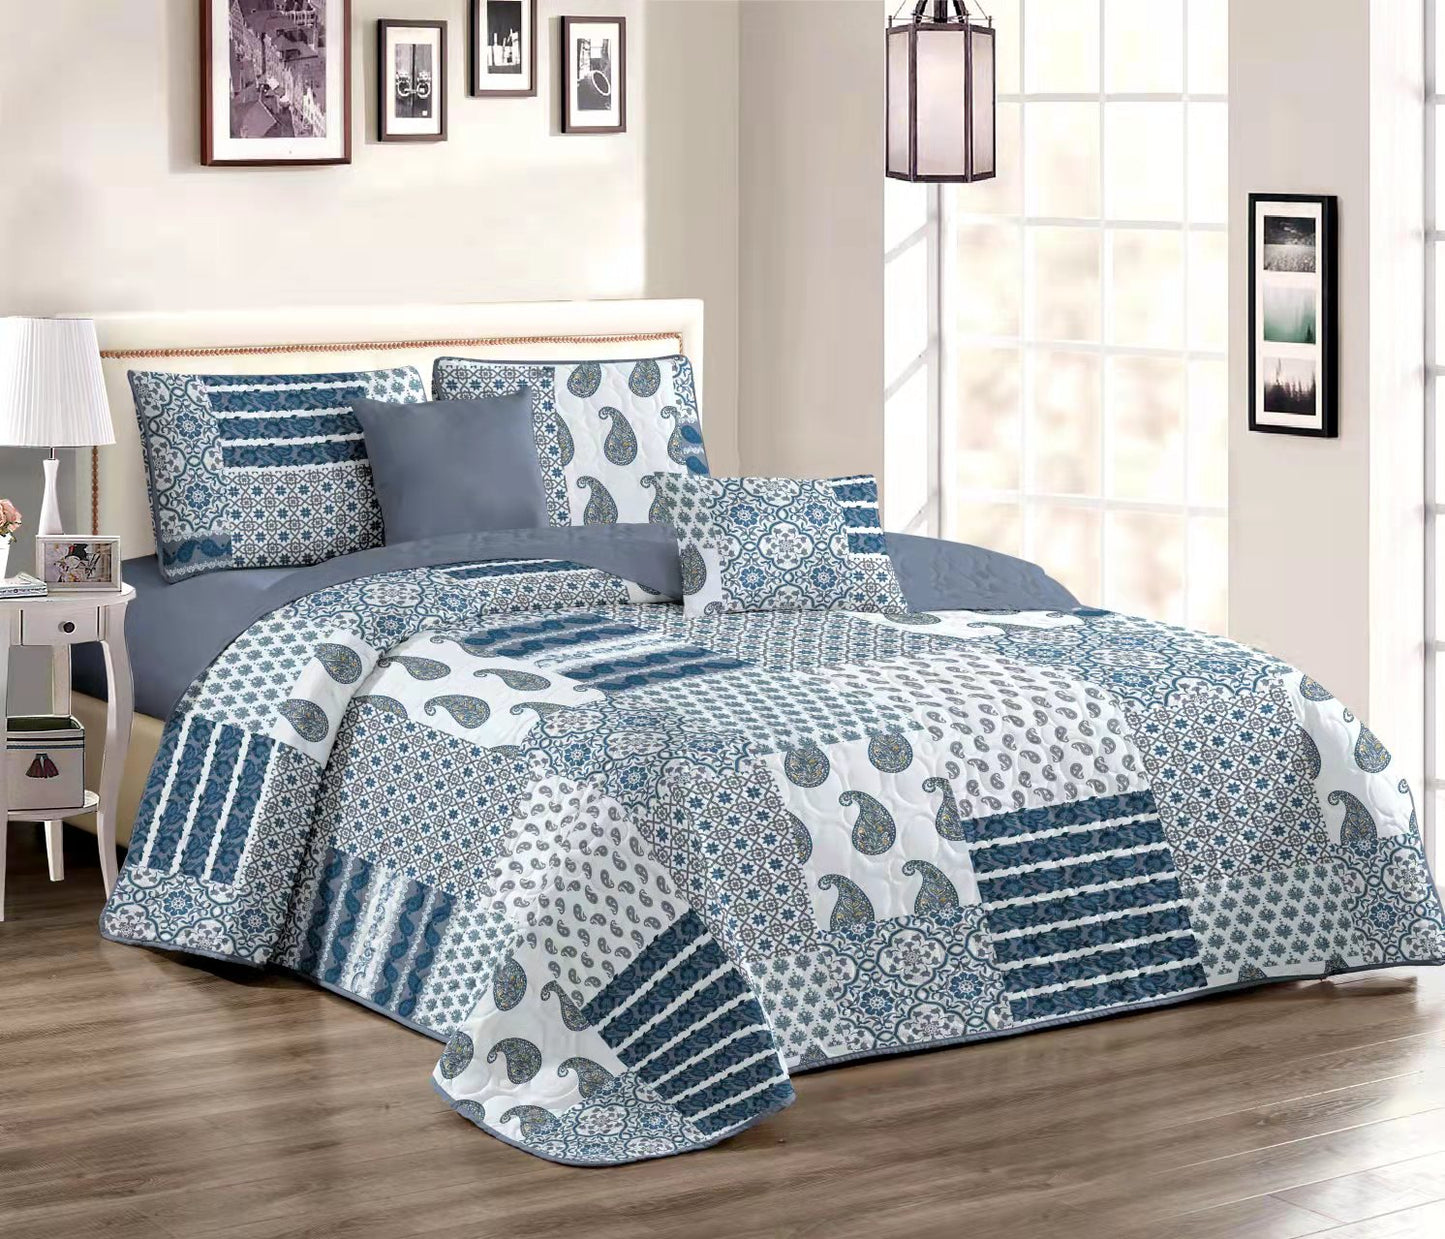 WONGS BEDDING Colorful Plaid Stitching Quilt Set With 2 Pillowcases